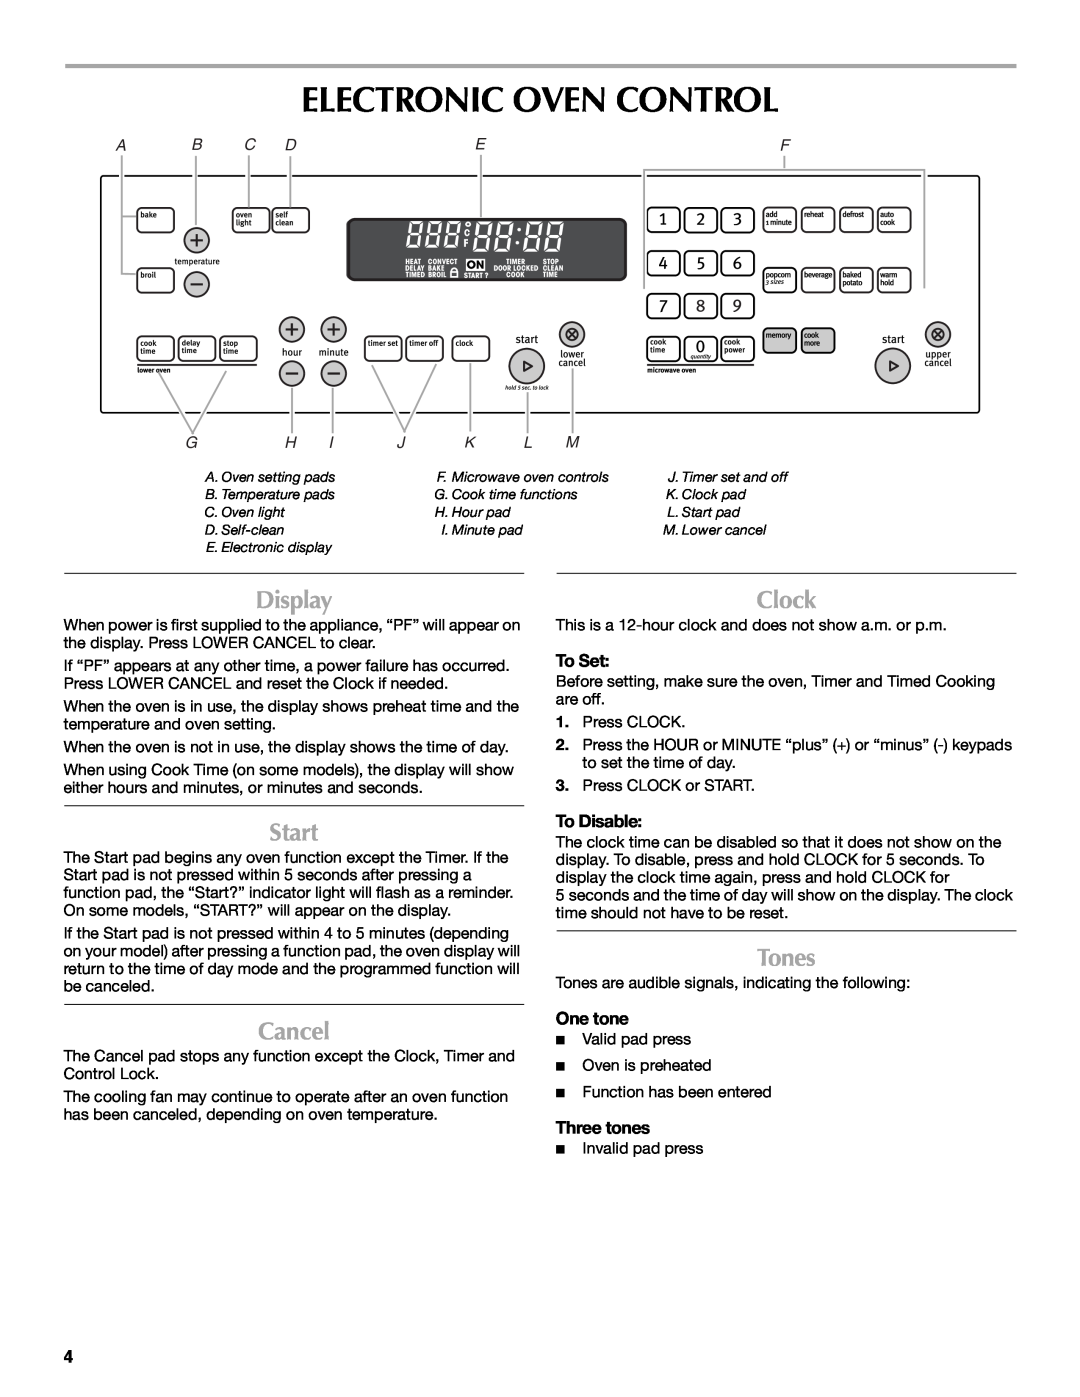 Maytag MMW7530WDS Electronic Oven Control, Start, Cancel, Tones, To Set, To Disable, One tone, Three tones, A B C Def 